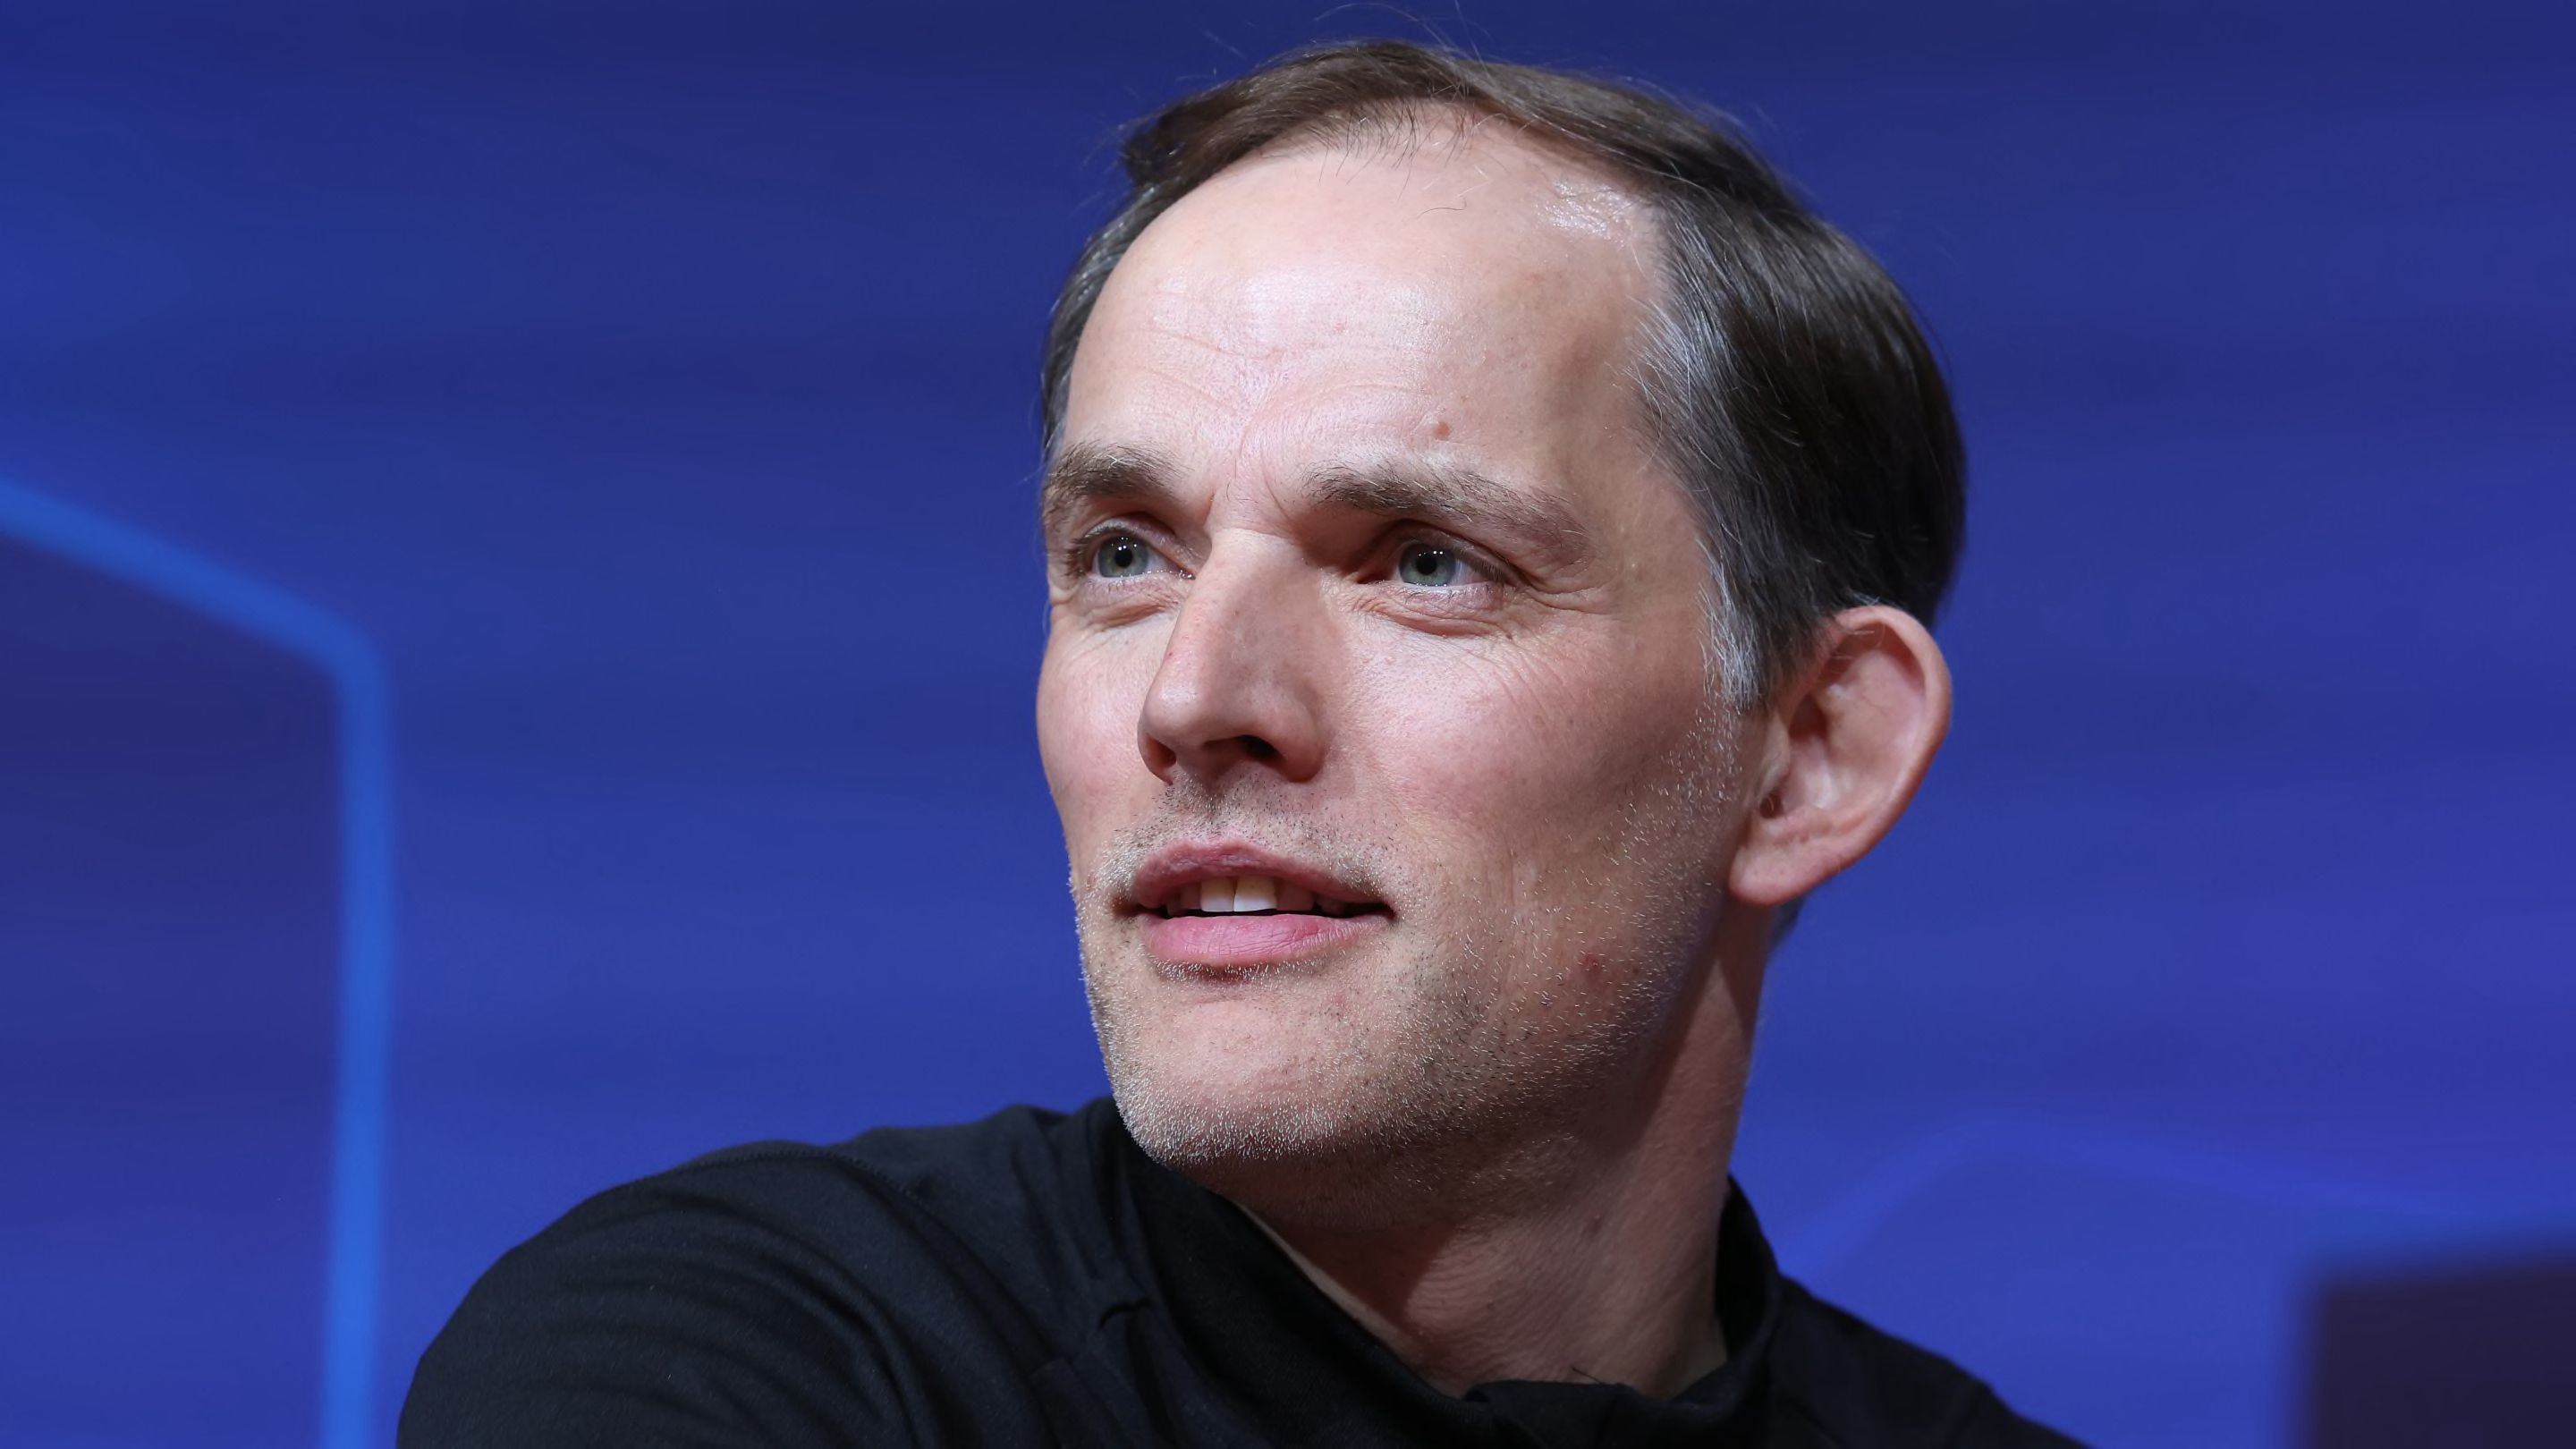 'It offends me deeply': Thomas Tuchel slams criticism from Bayern Munich chief